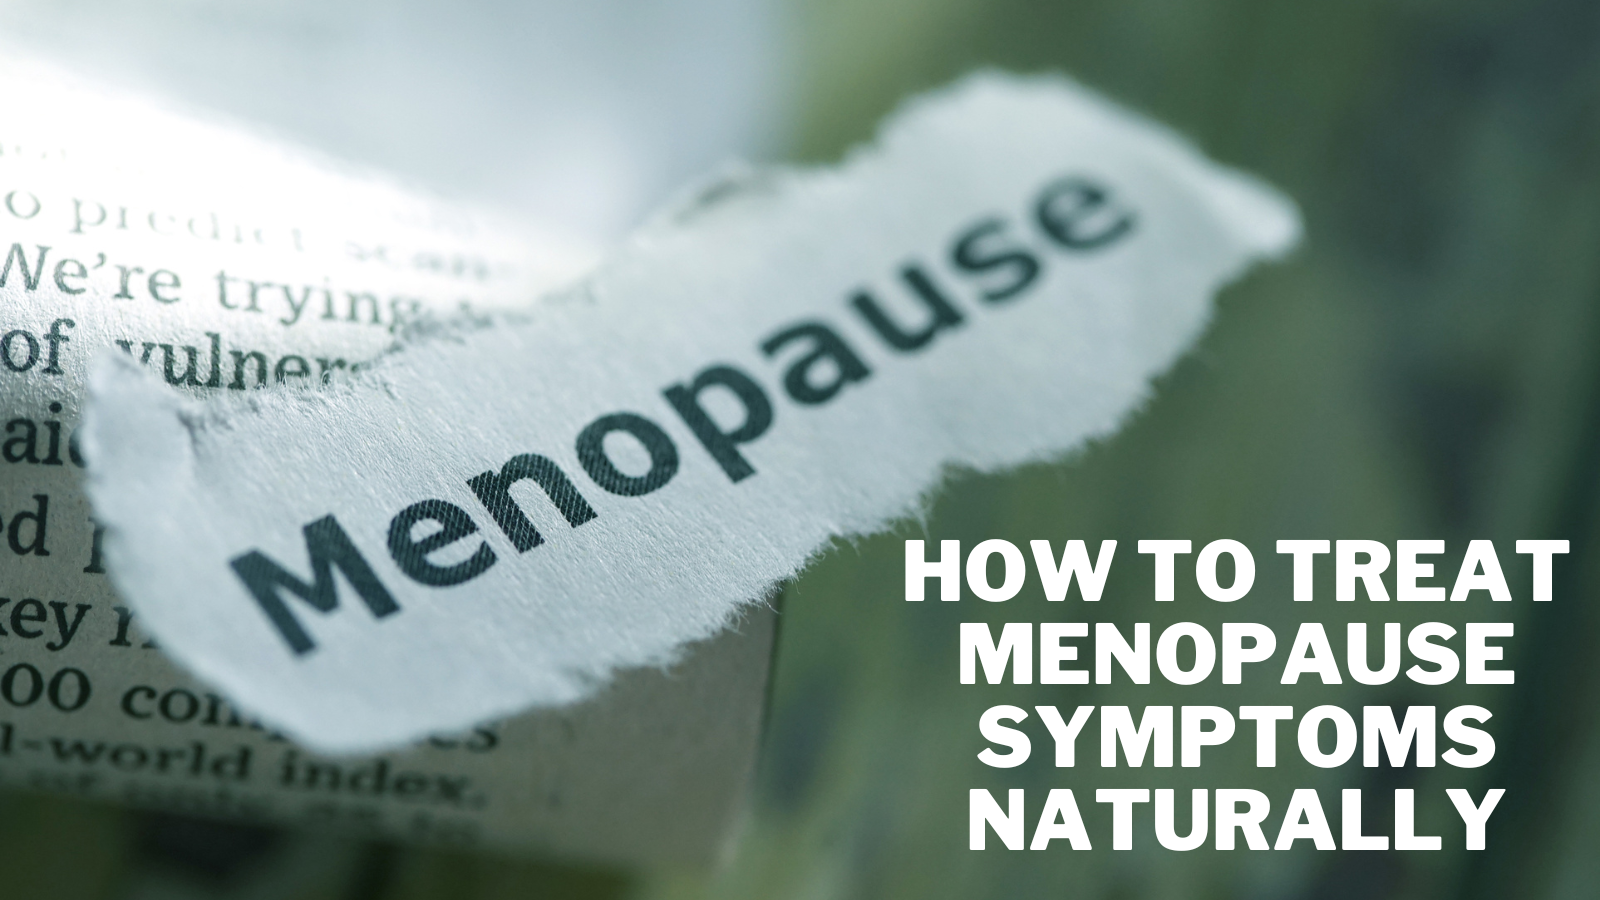 How To Treat Menopause Symptoms Naturally